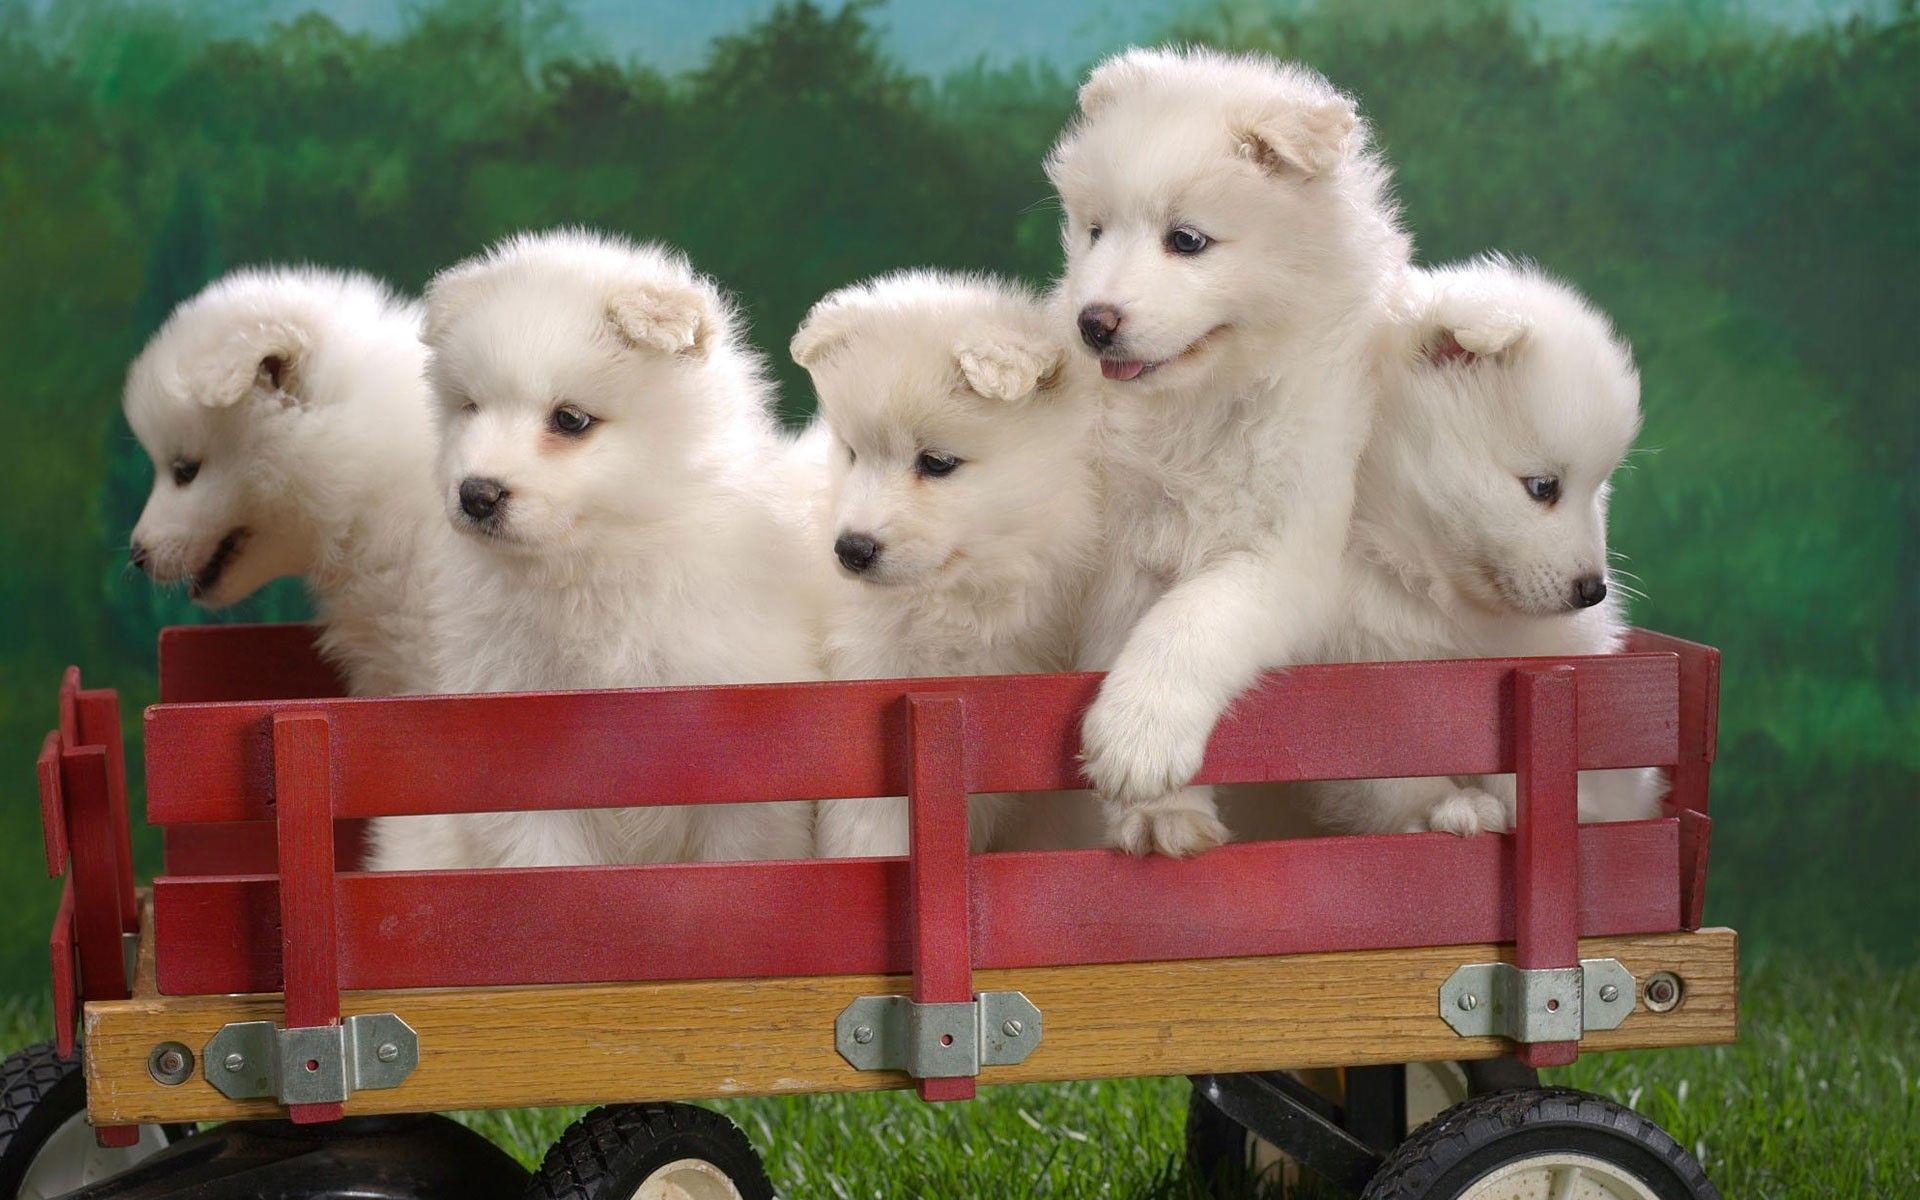 Cute Five Puppies on Toy Trolly Pets Animal Wallpaper